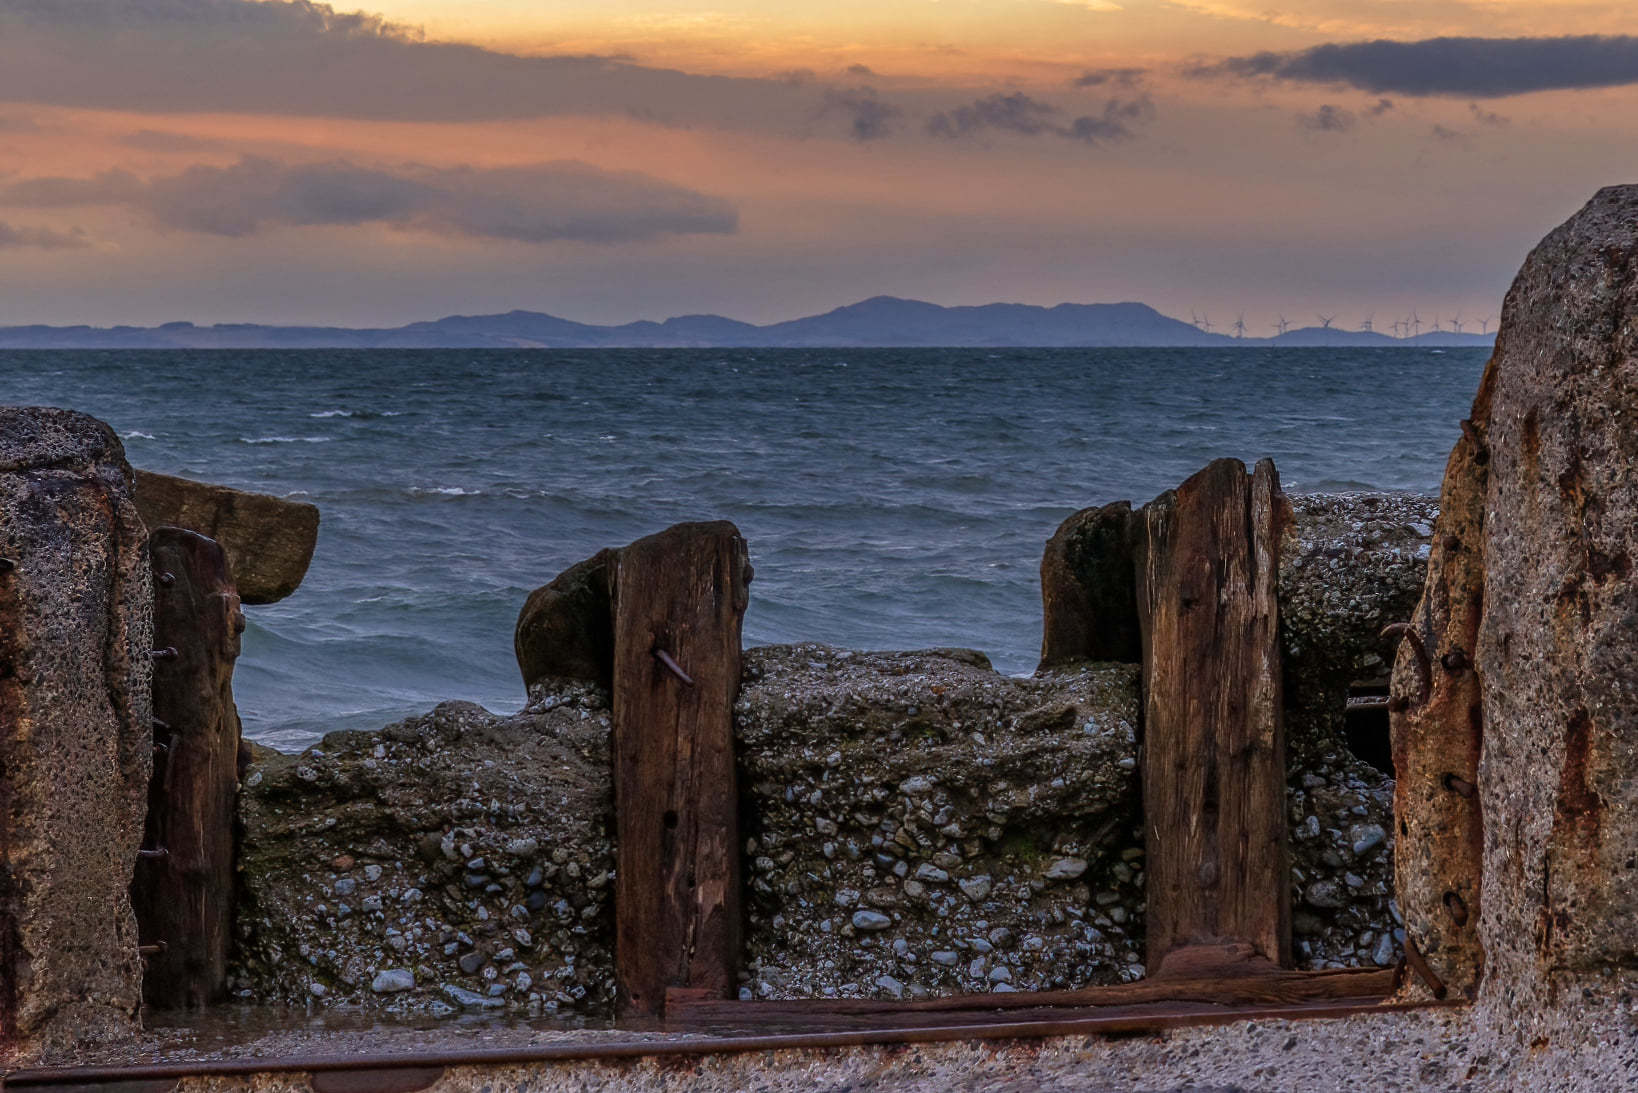 SEASCAPE: Camera club member Ryan Denby took this lovely photograph at sunset at Harrington